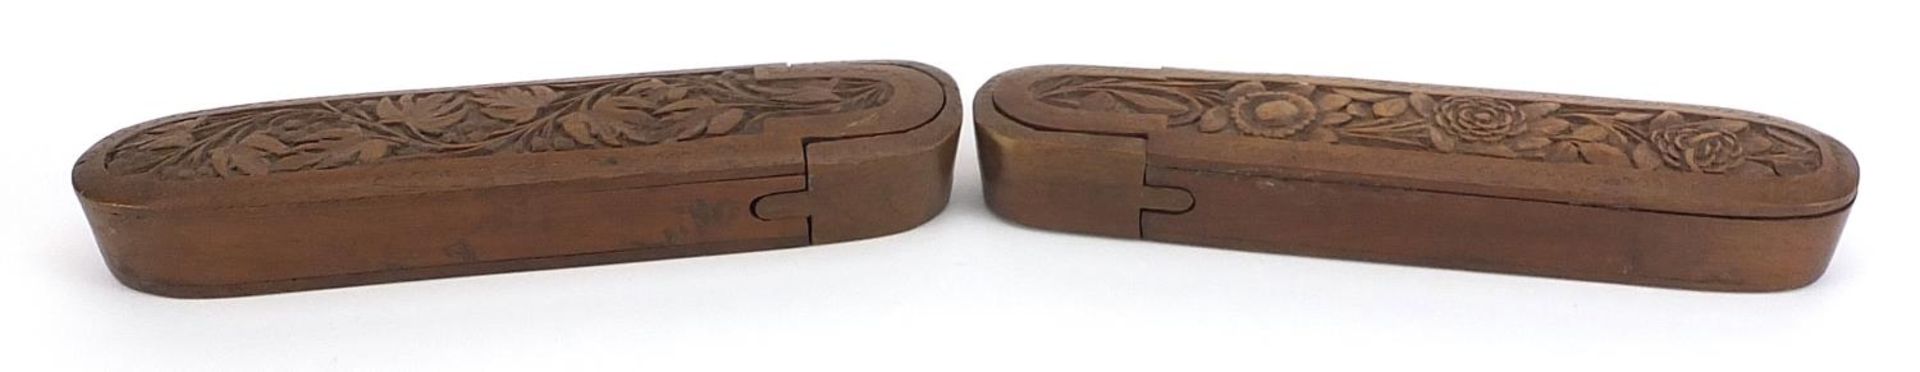 Pair of Islamic wooden pen boxes carved with leaves and flowers, each 24.5cm in length - Image 3 of 4